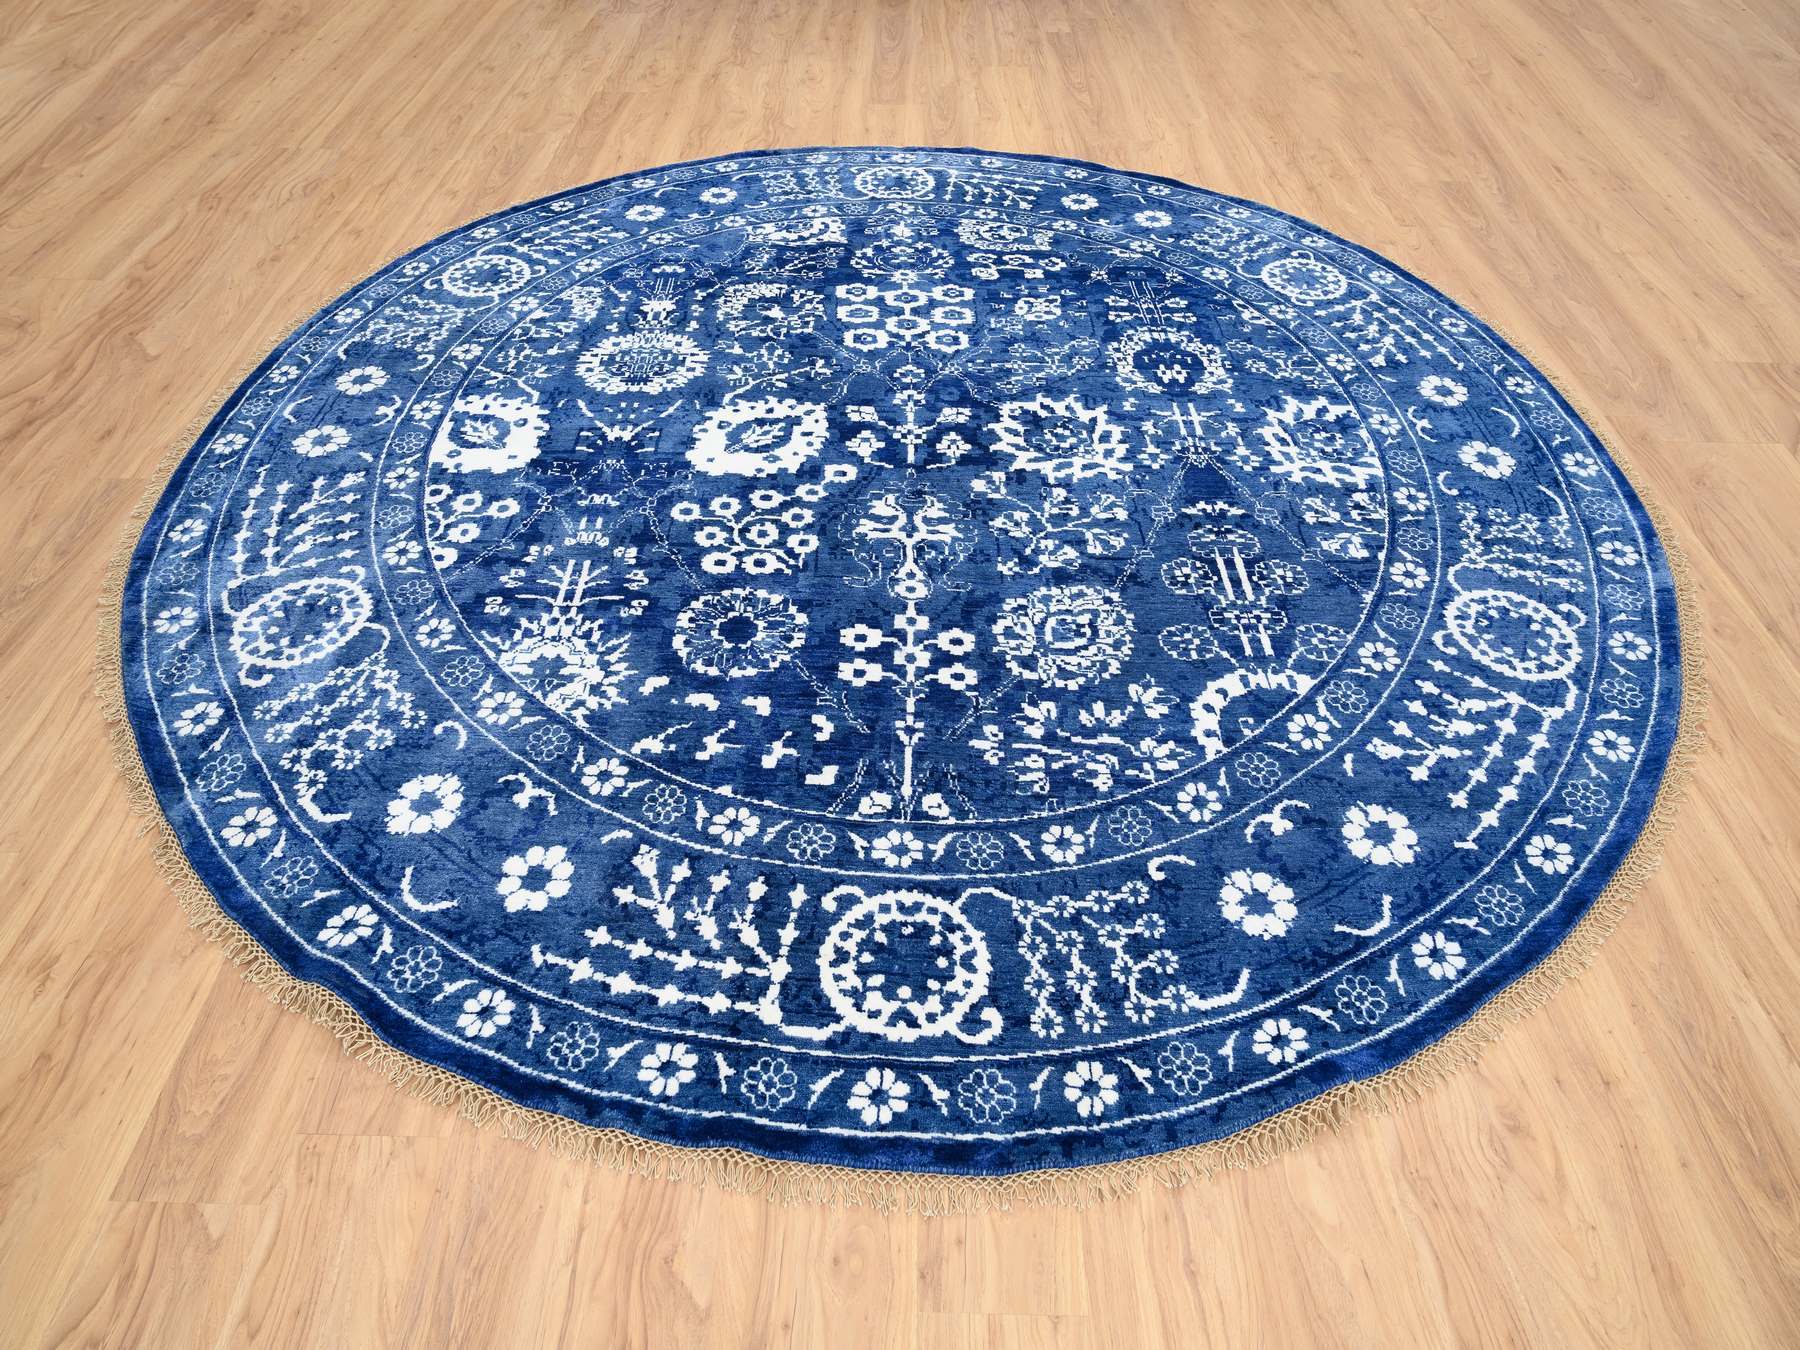 Transitional Rugs LUV583623